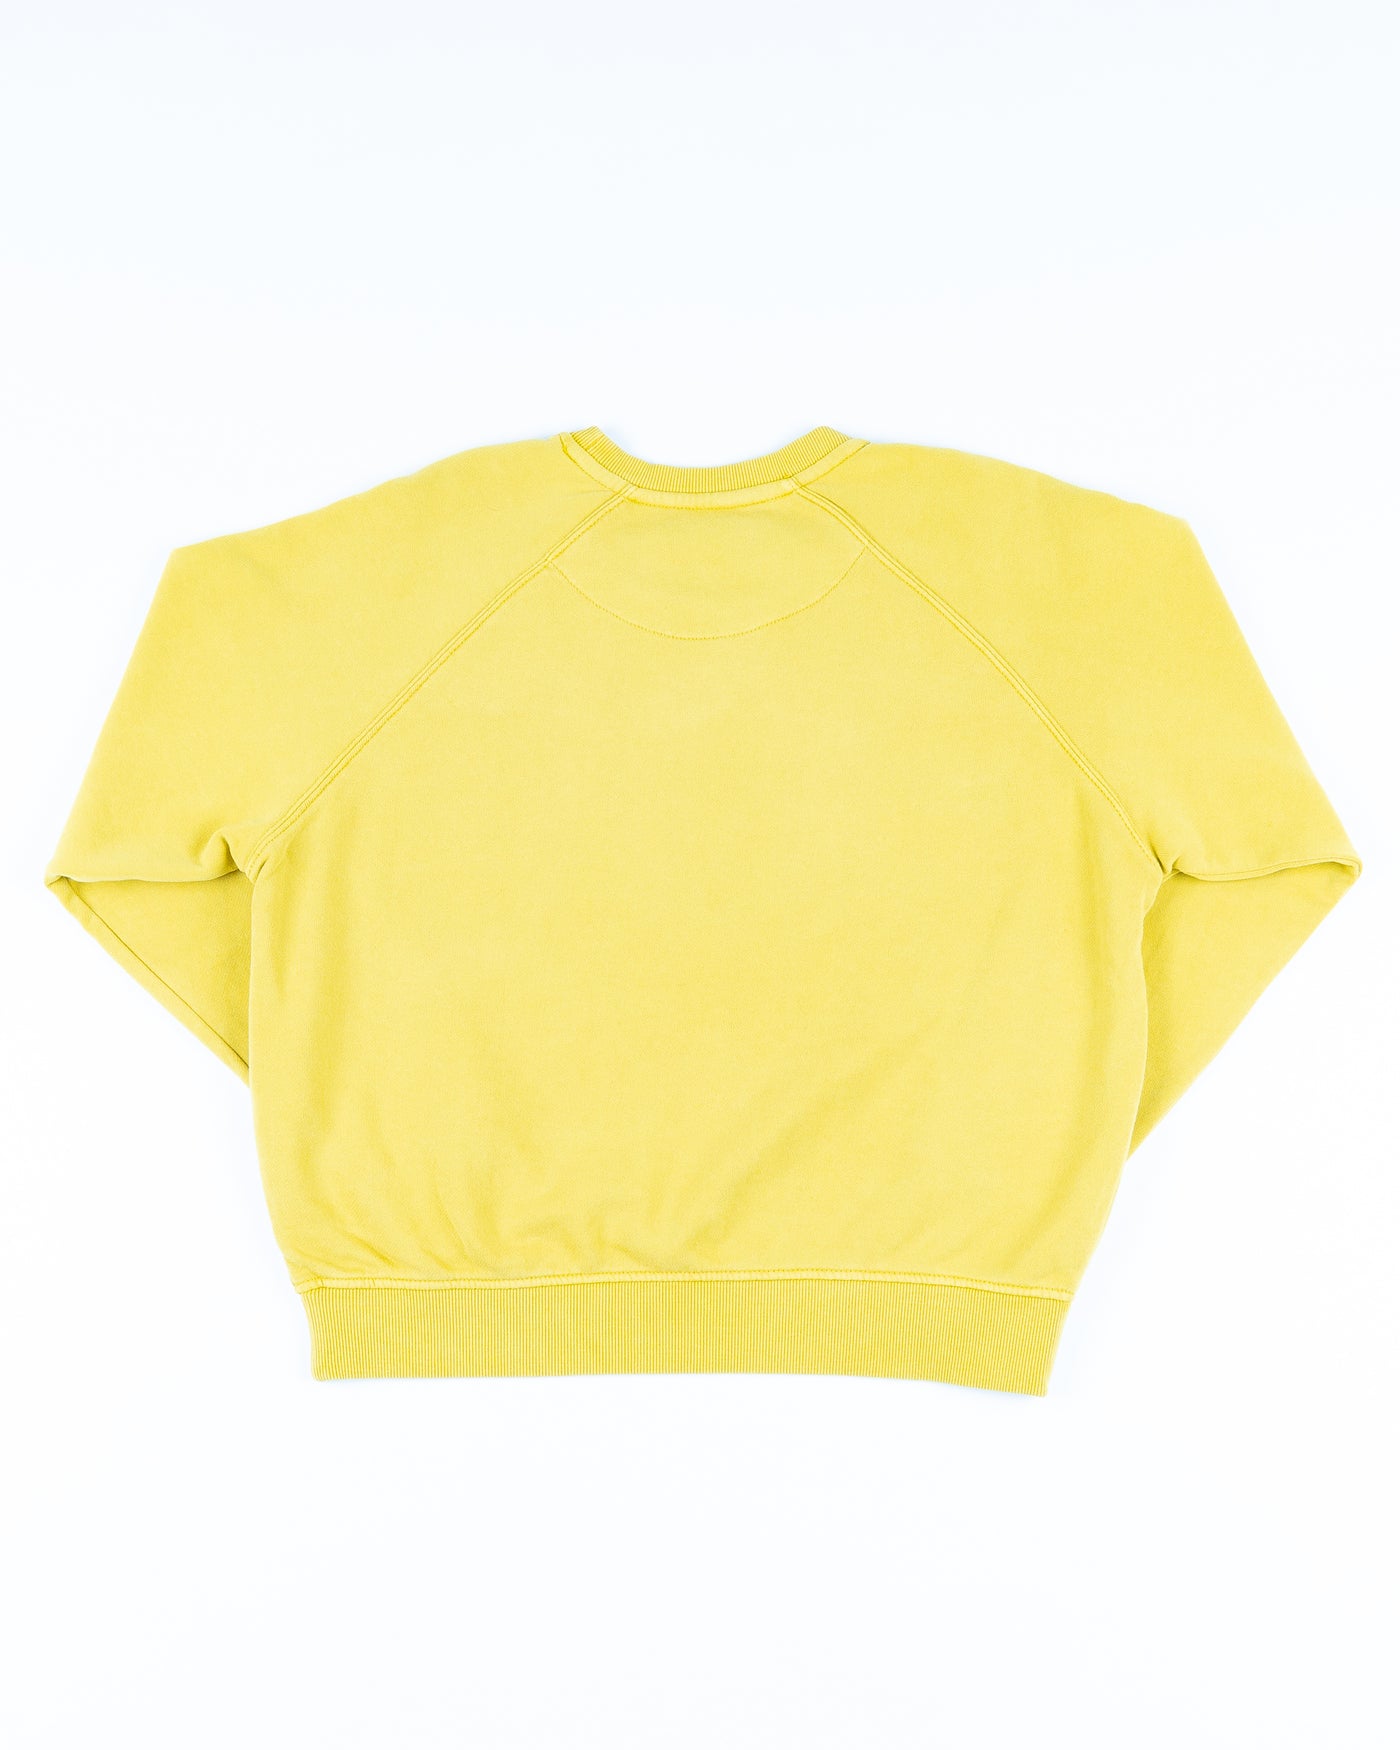 yellow Sportiqe ladies crewneck with Chicago Blackhawks secondary logo on front - back lay flat